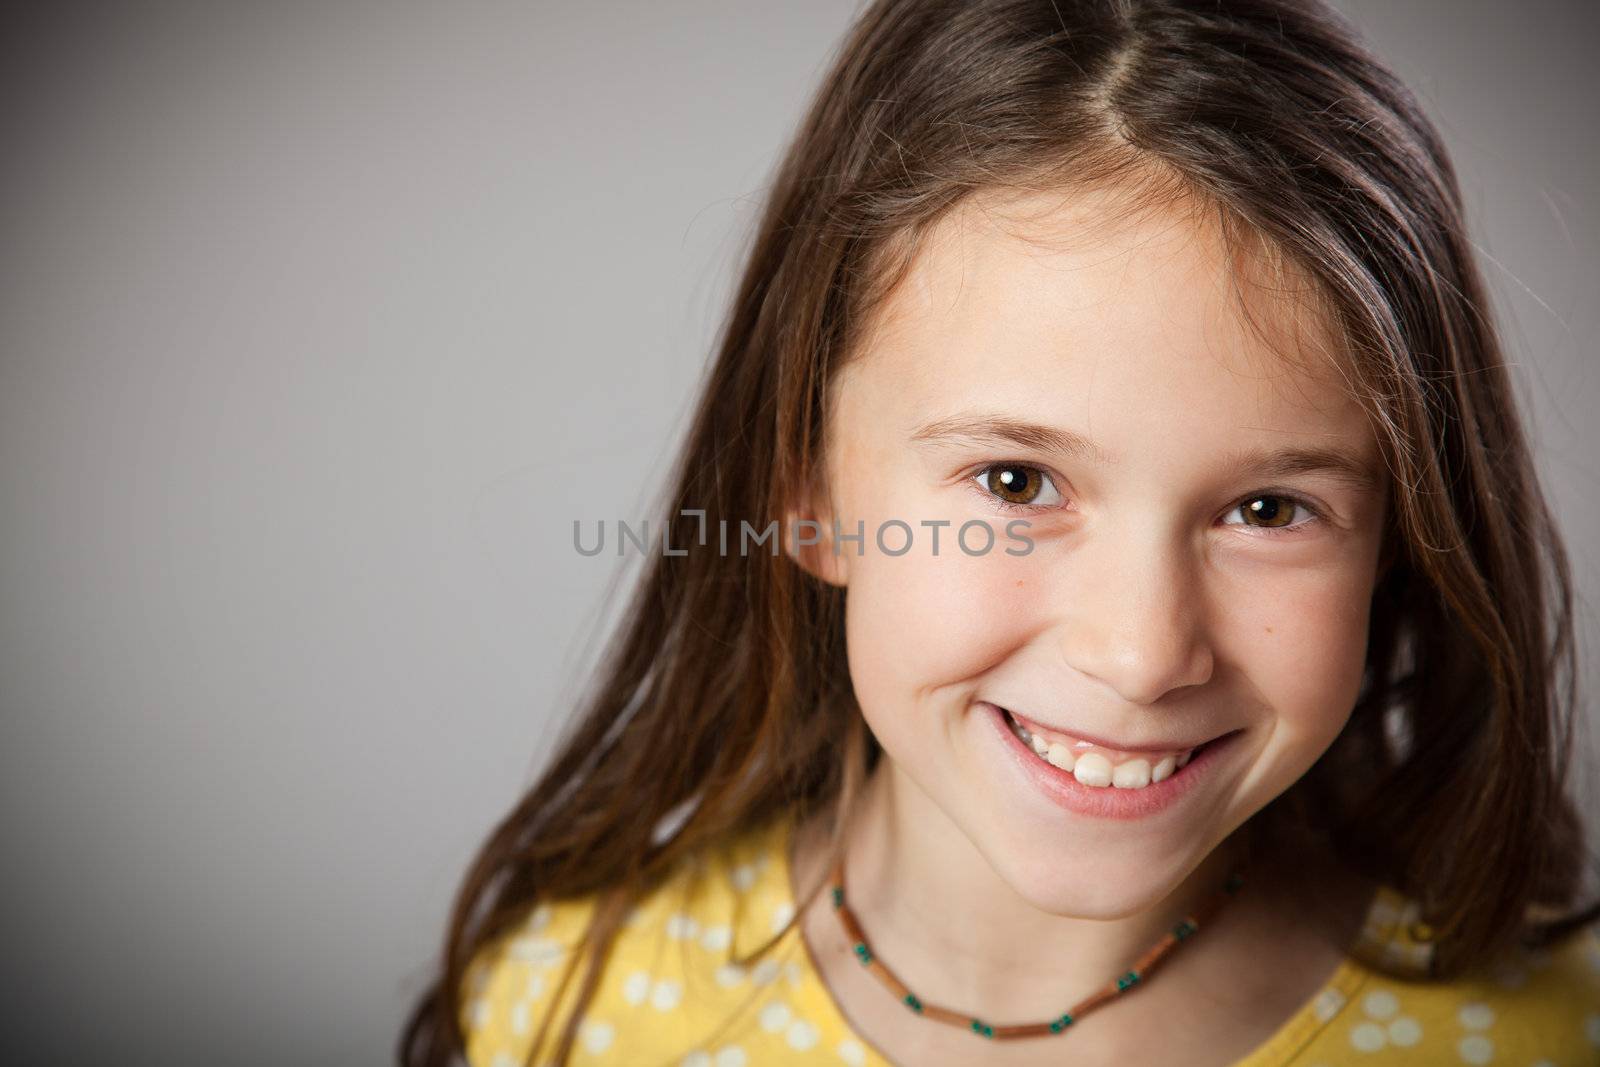 Girl in studio smiling and happy